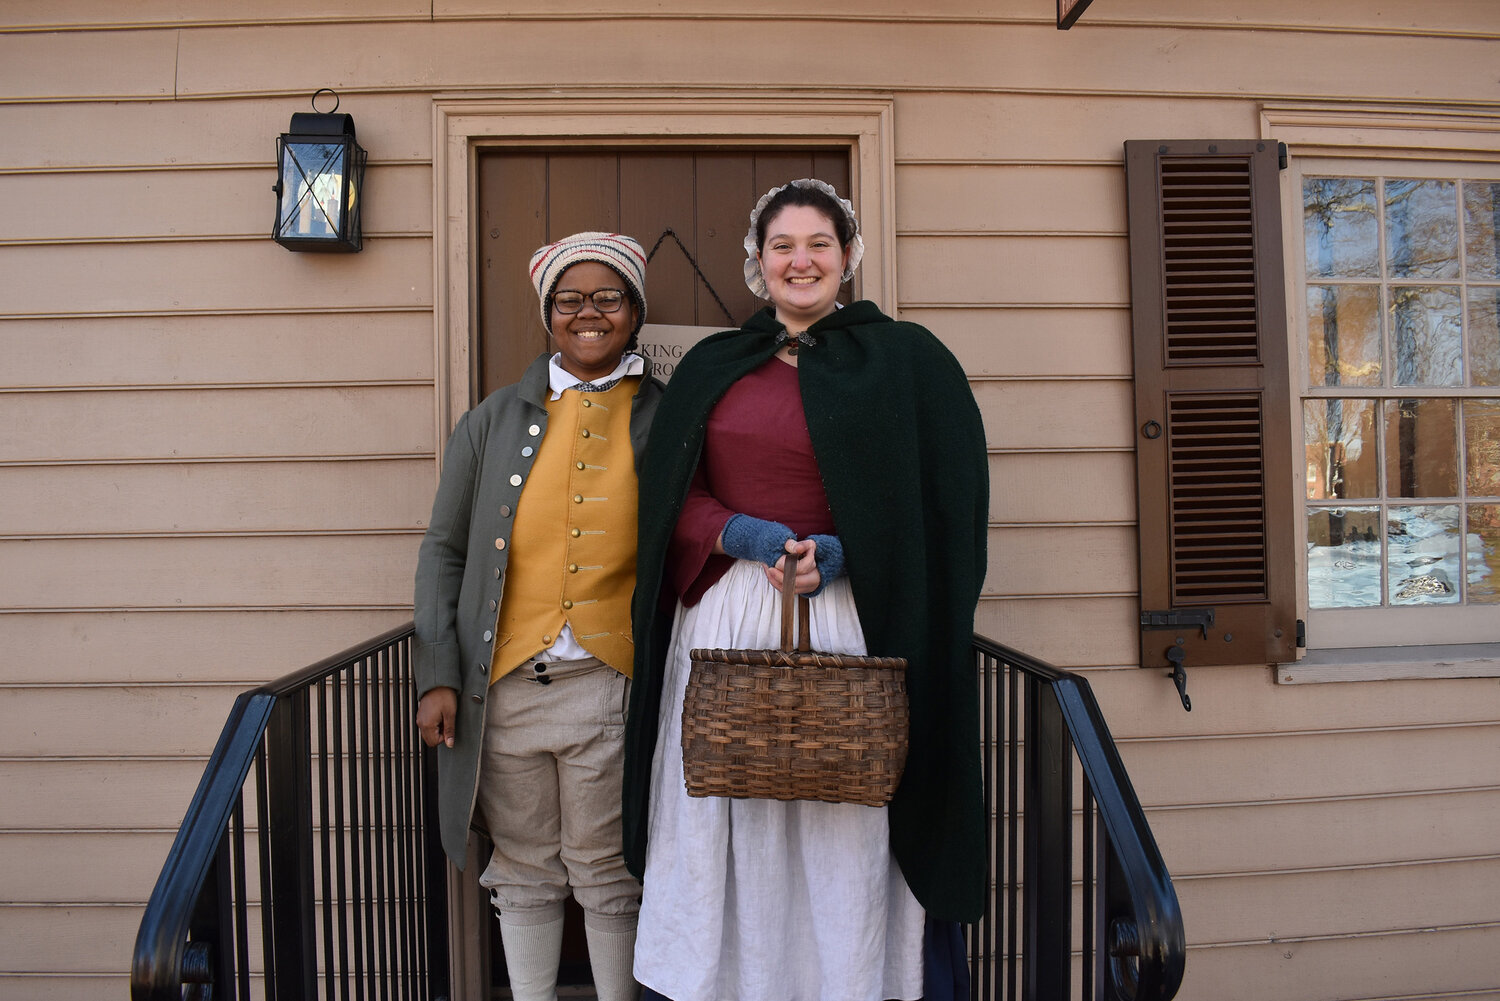 Bambi Smith, left, and Jane Pilato are historic site interpreters for Delaware State Parks. First State Heritage Park offers “Hidden Lives: Slavery, Freedom, and the Green” walking tours every Thursday, Friday and Saturday in February 2024. They share the stories of everyday people whose lives and experiences of underrepresented individuals whose stories might otherwise be forgotten.